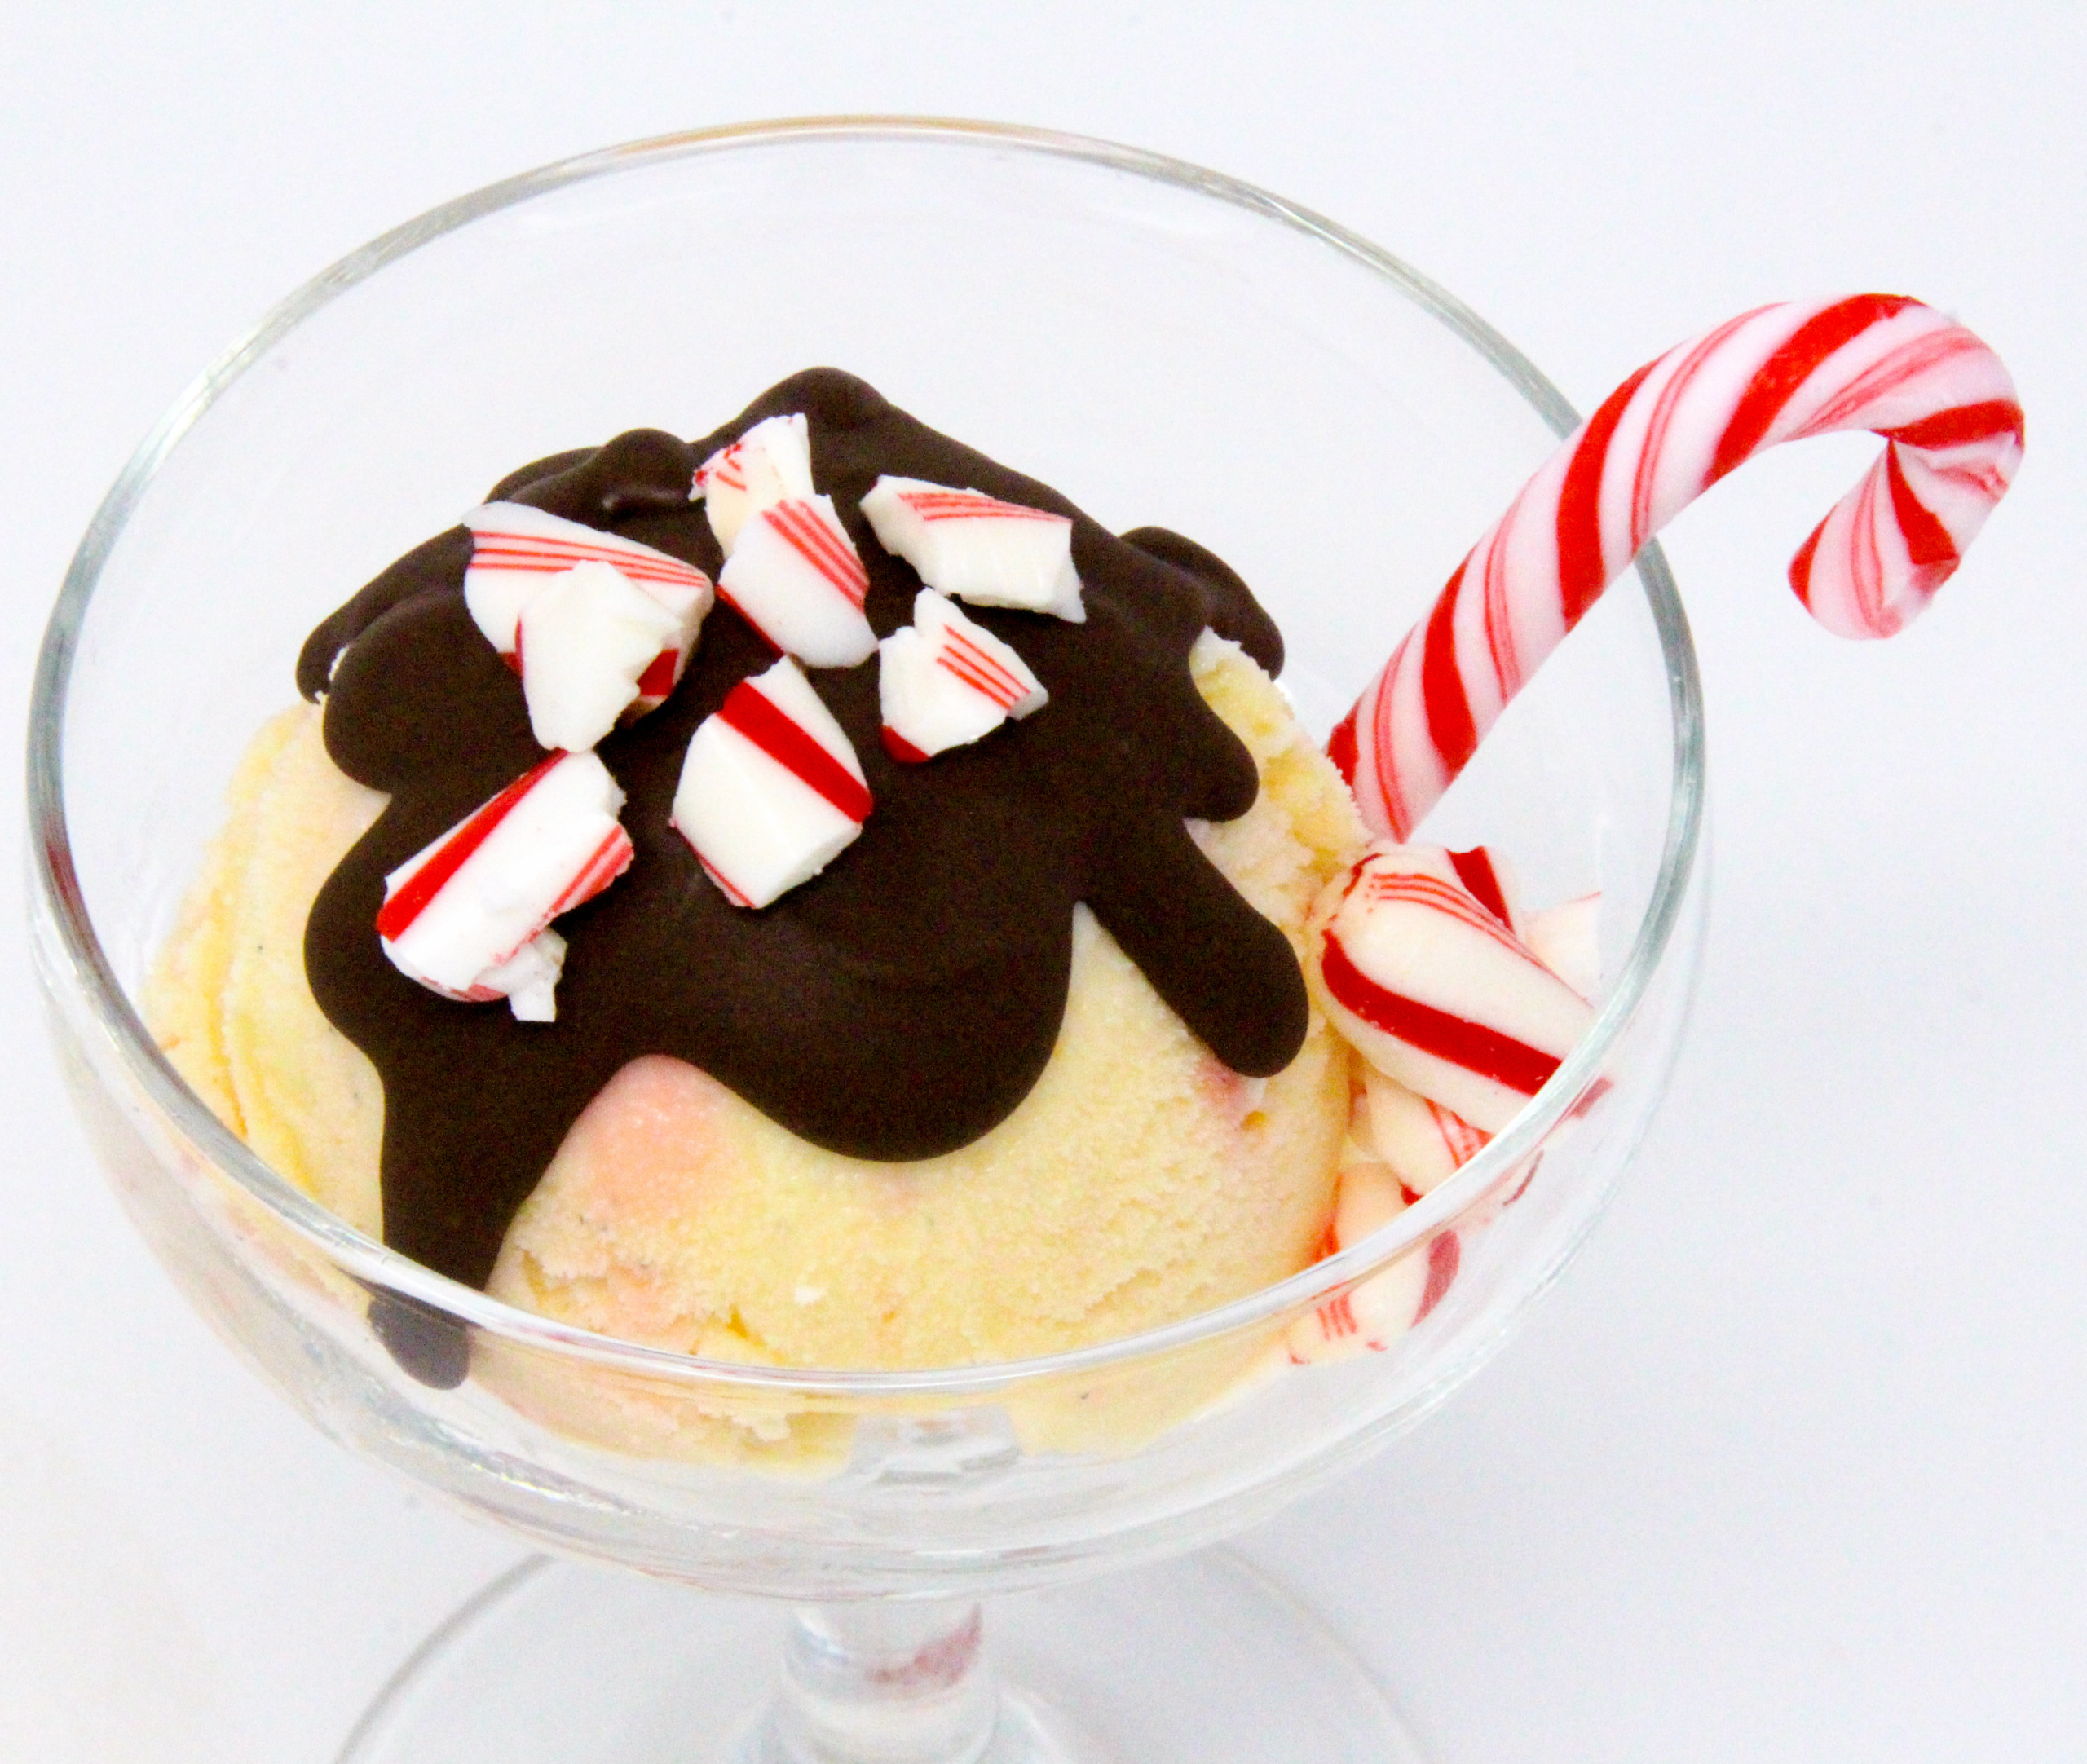 Peppermint Candy Ice Cream is ultra rich and ultra flavorful thanks to a generous amount of peppermint candies and peppermint extract! With a drizzle of chocolate, this is swoon worthy. Recipe shared with permission granted by Abby Collette, author of A GAME OF CONES.